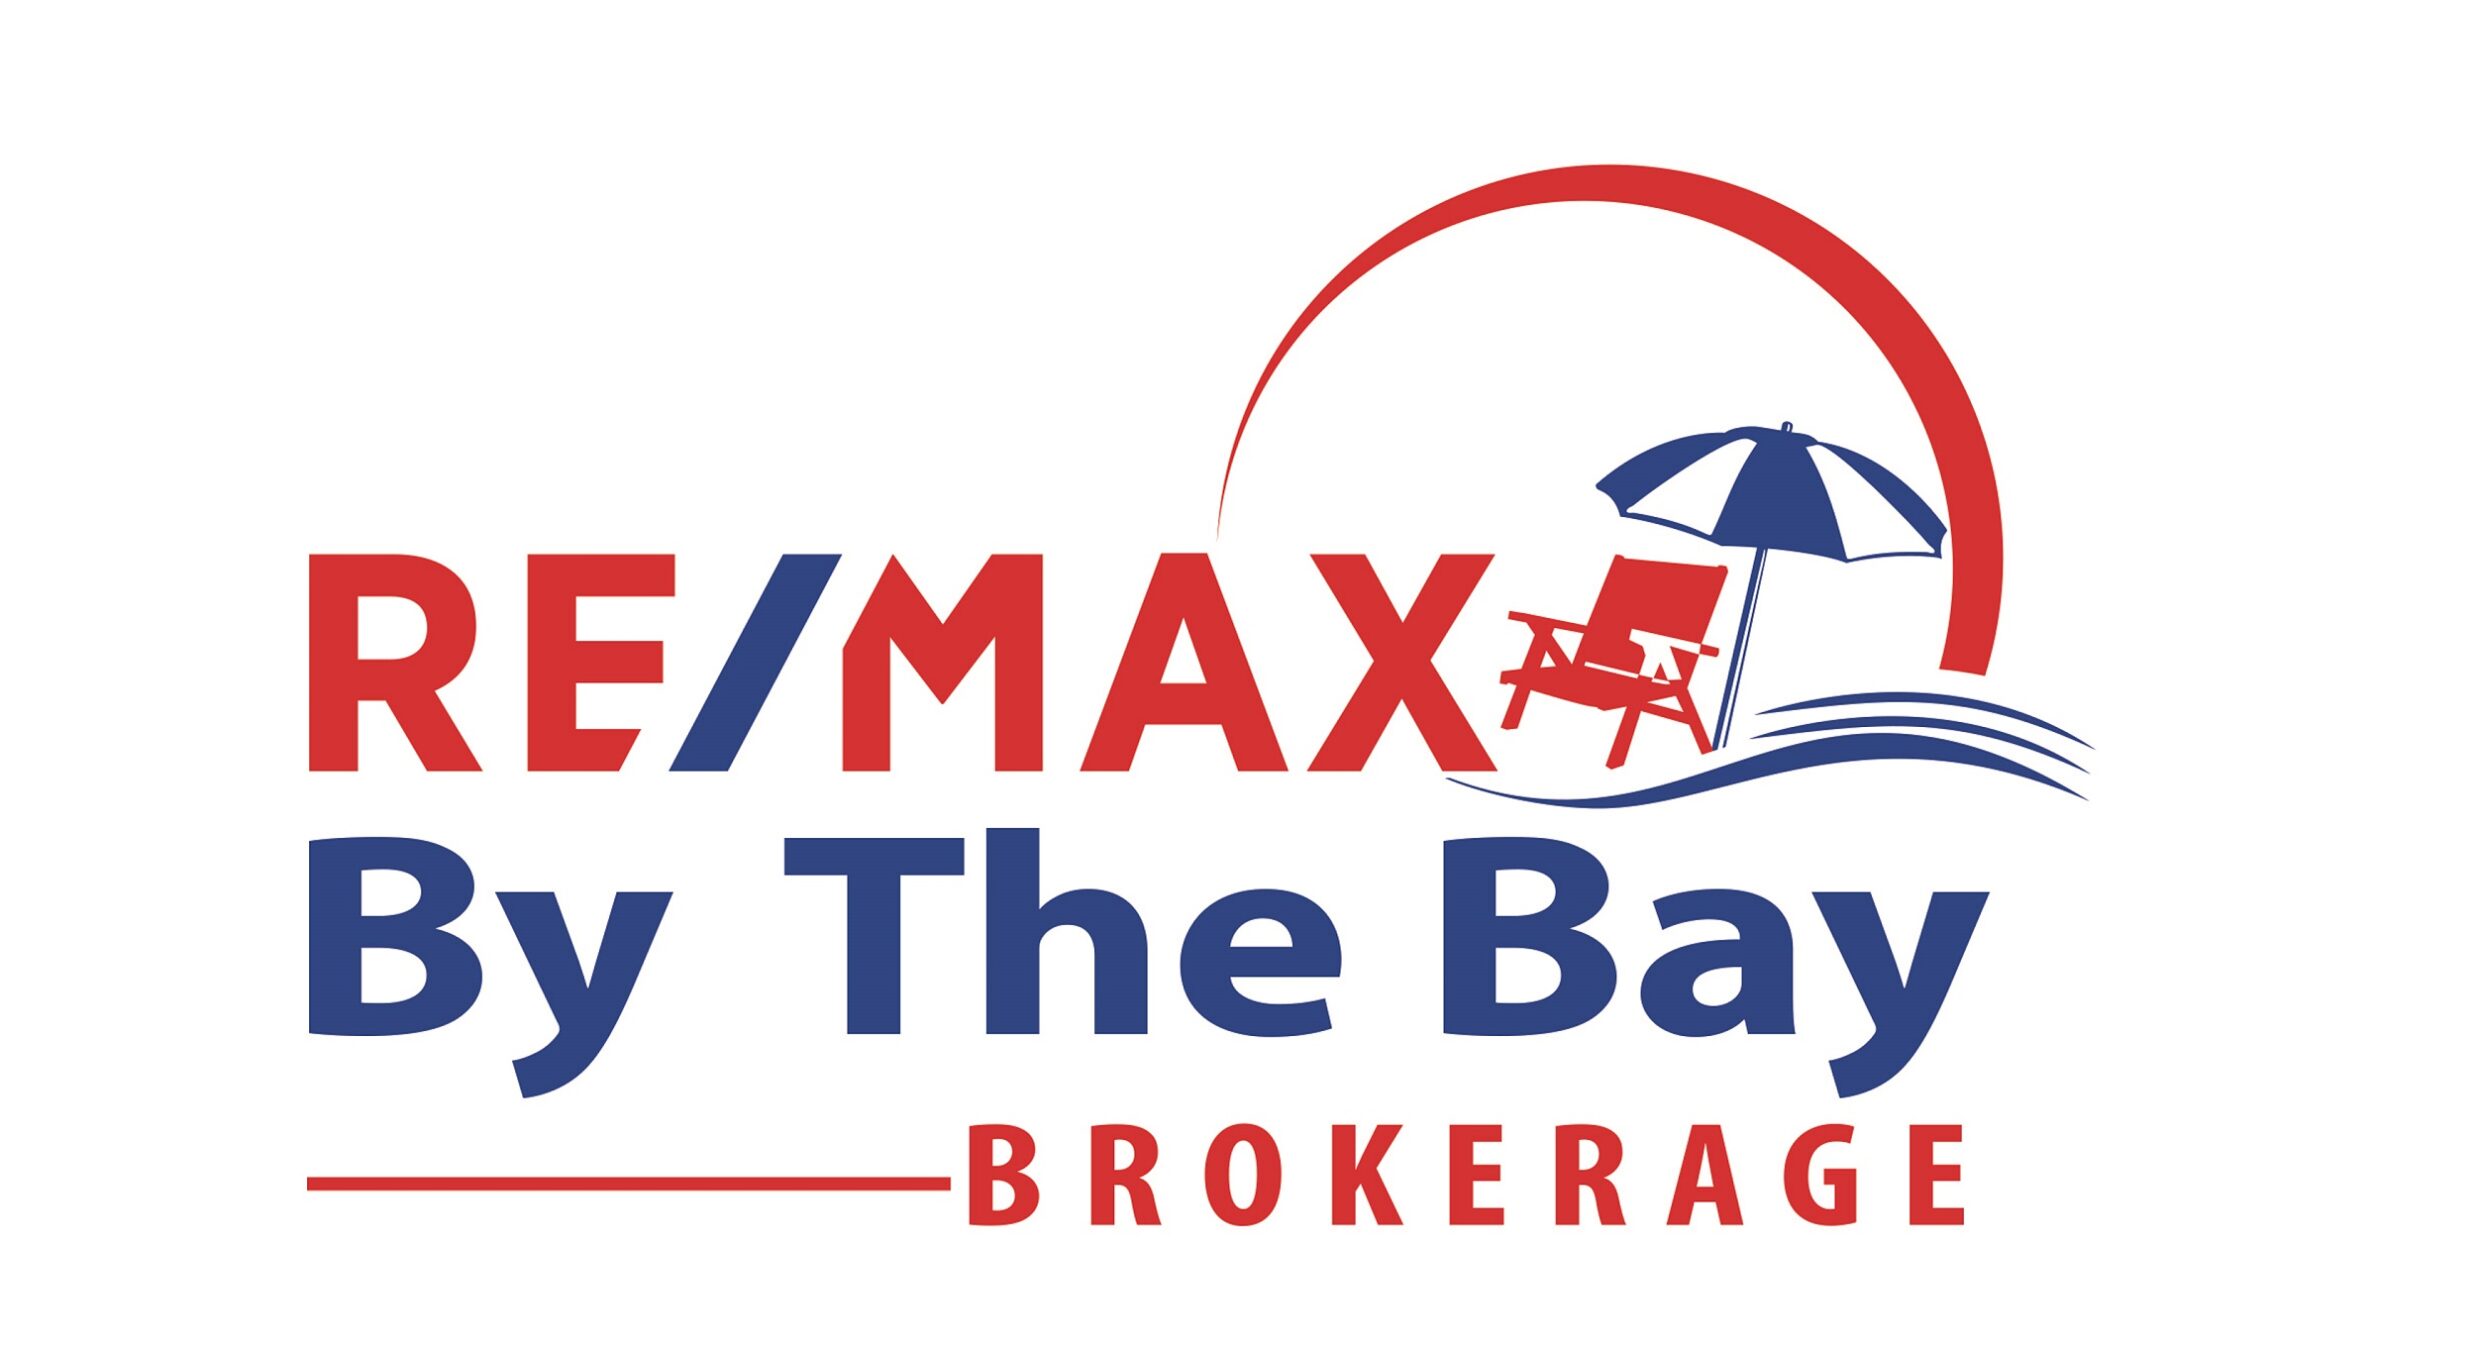 Remax by the Bay